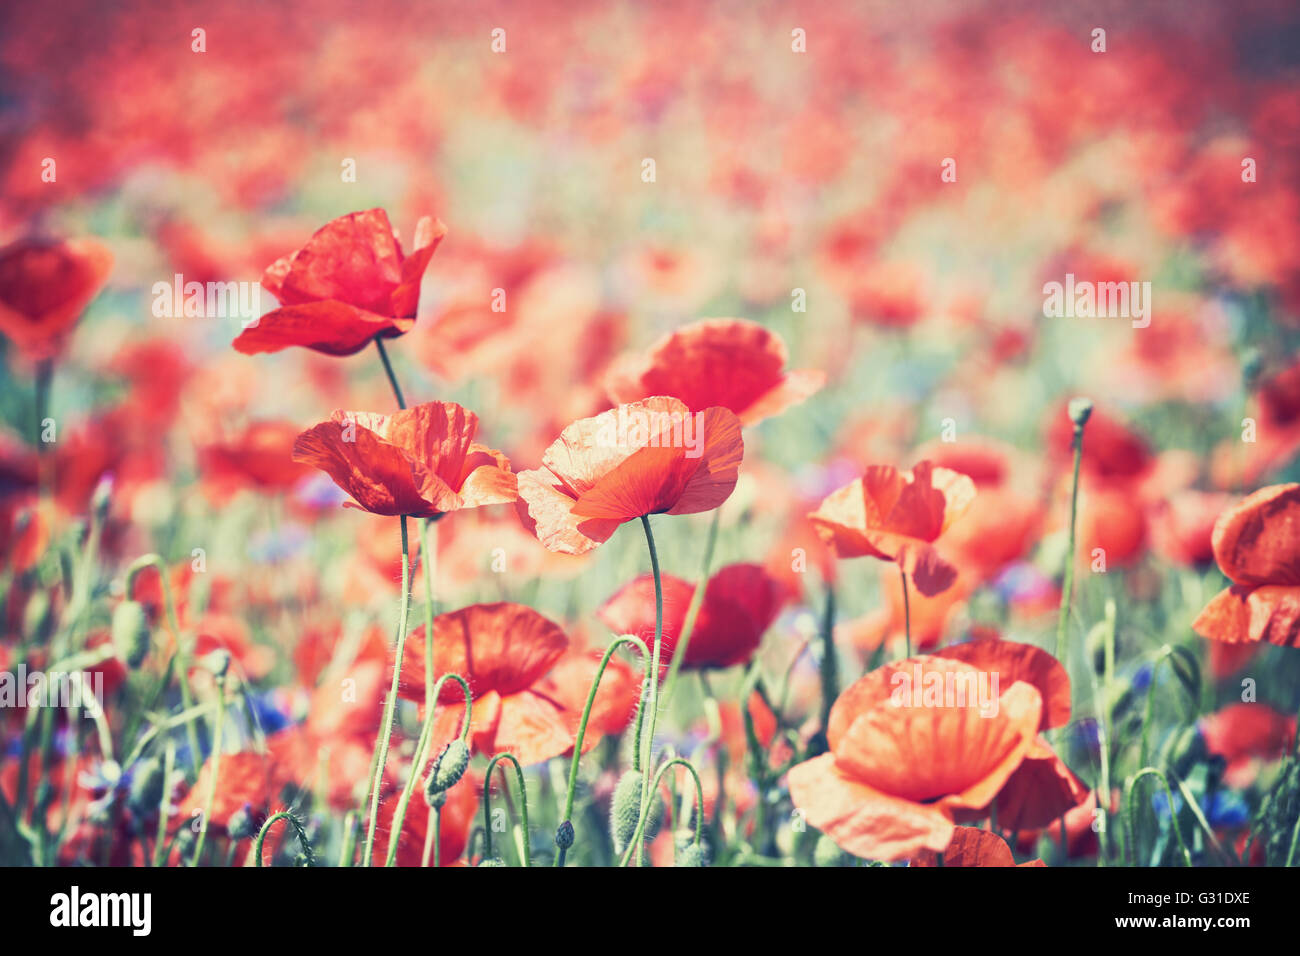 Vintage toned poppy flowers, shallow depth of field, natural artistic background. Stock Photo